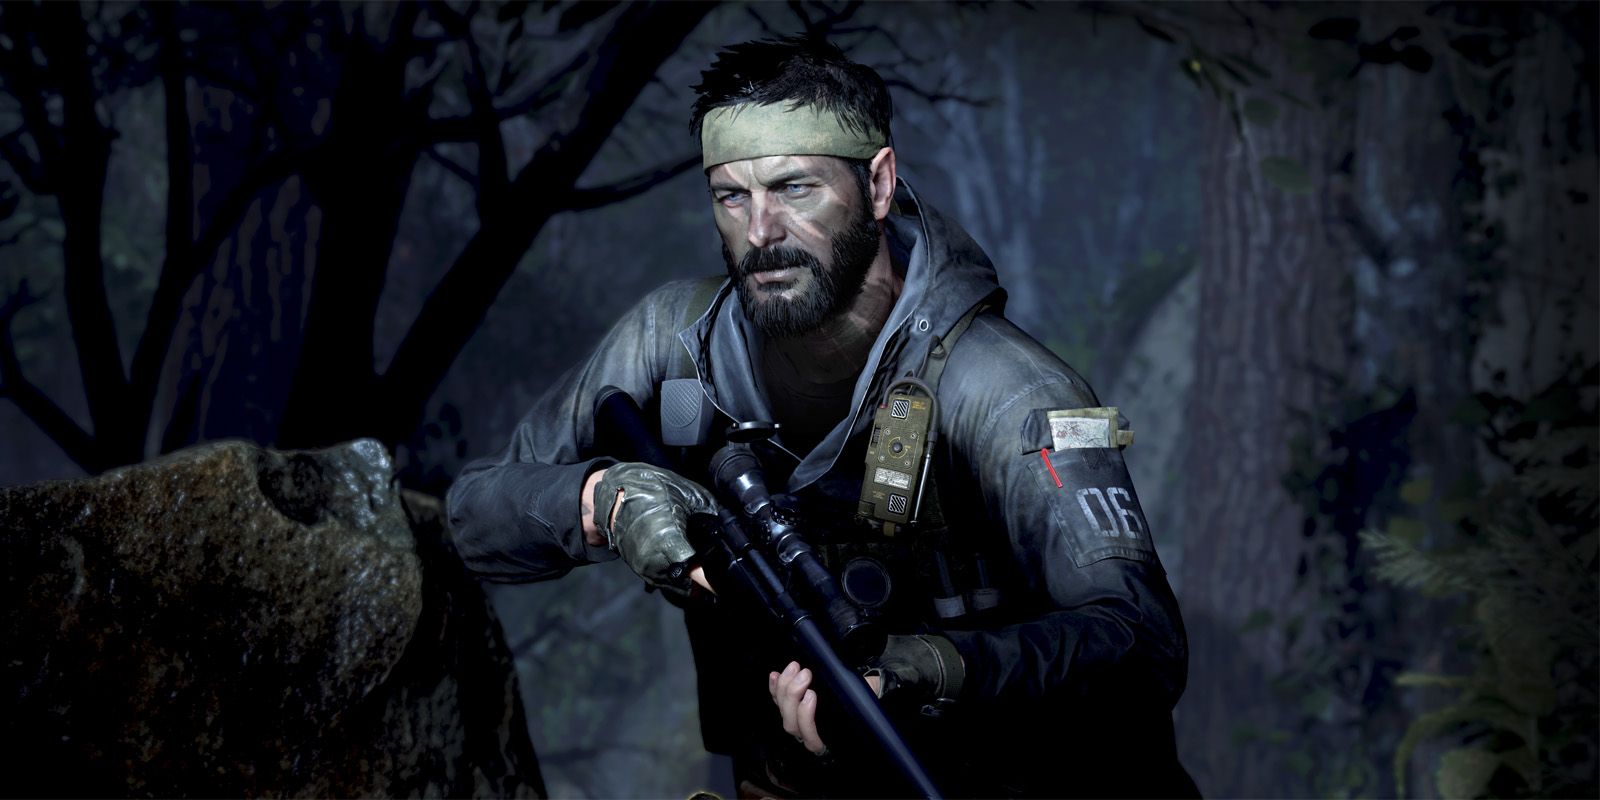 Call Of Duty Accounts Hacked? Activision Denies Any Compromise